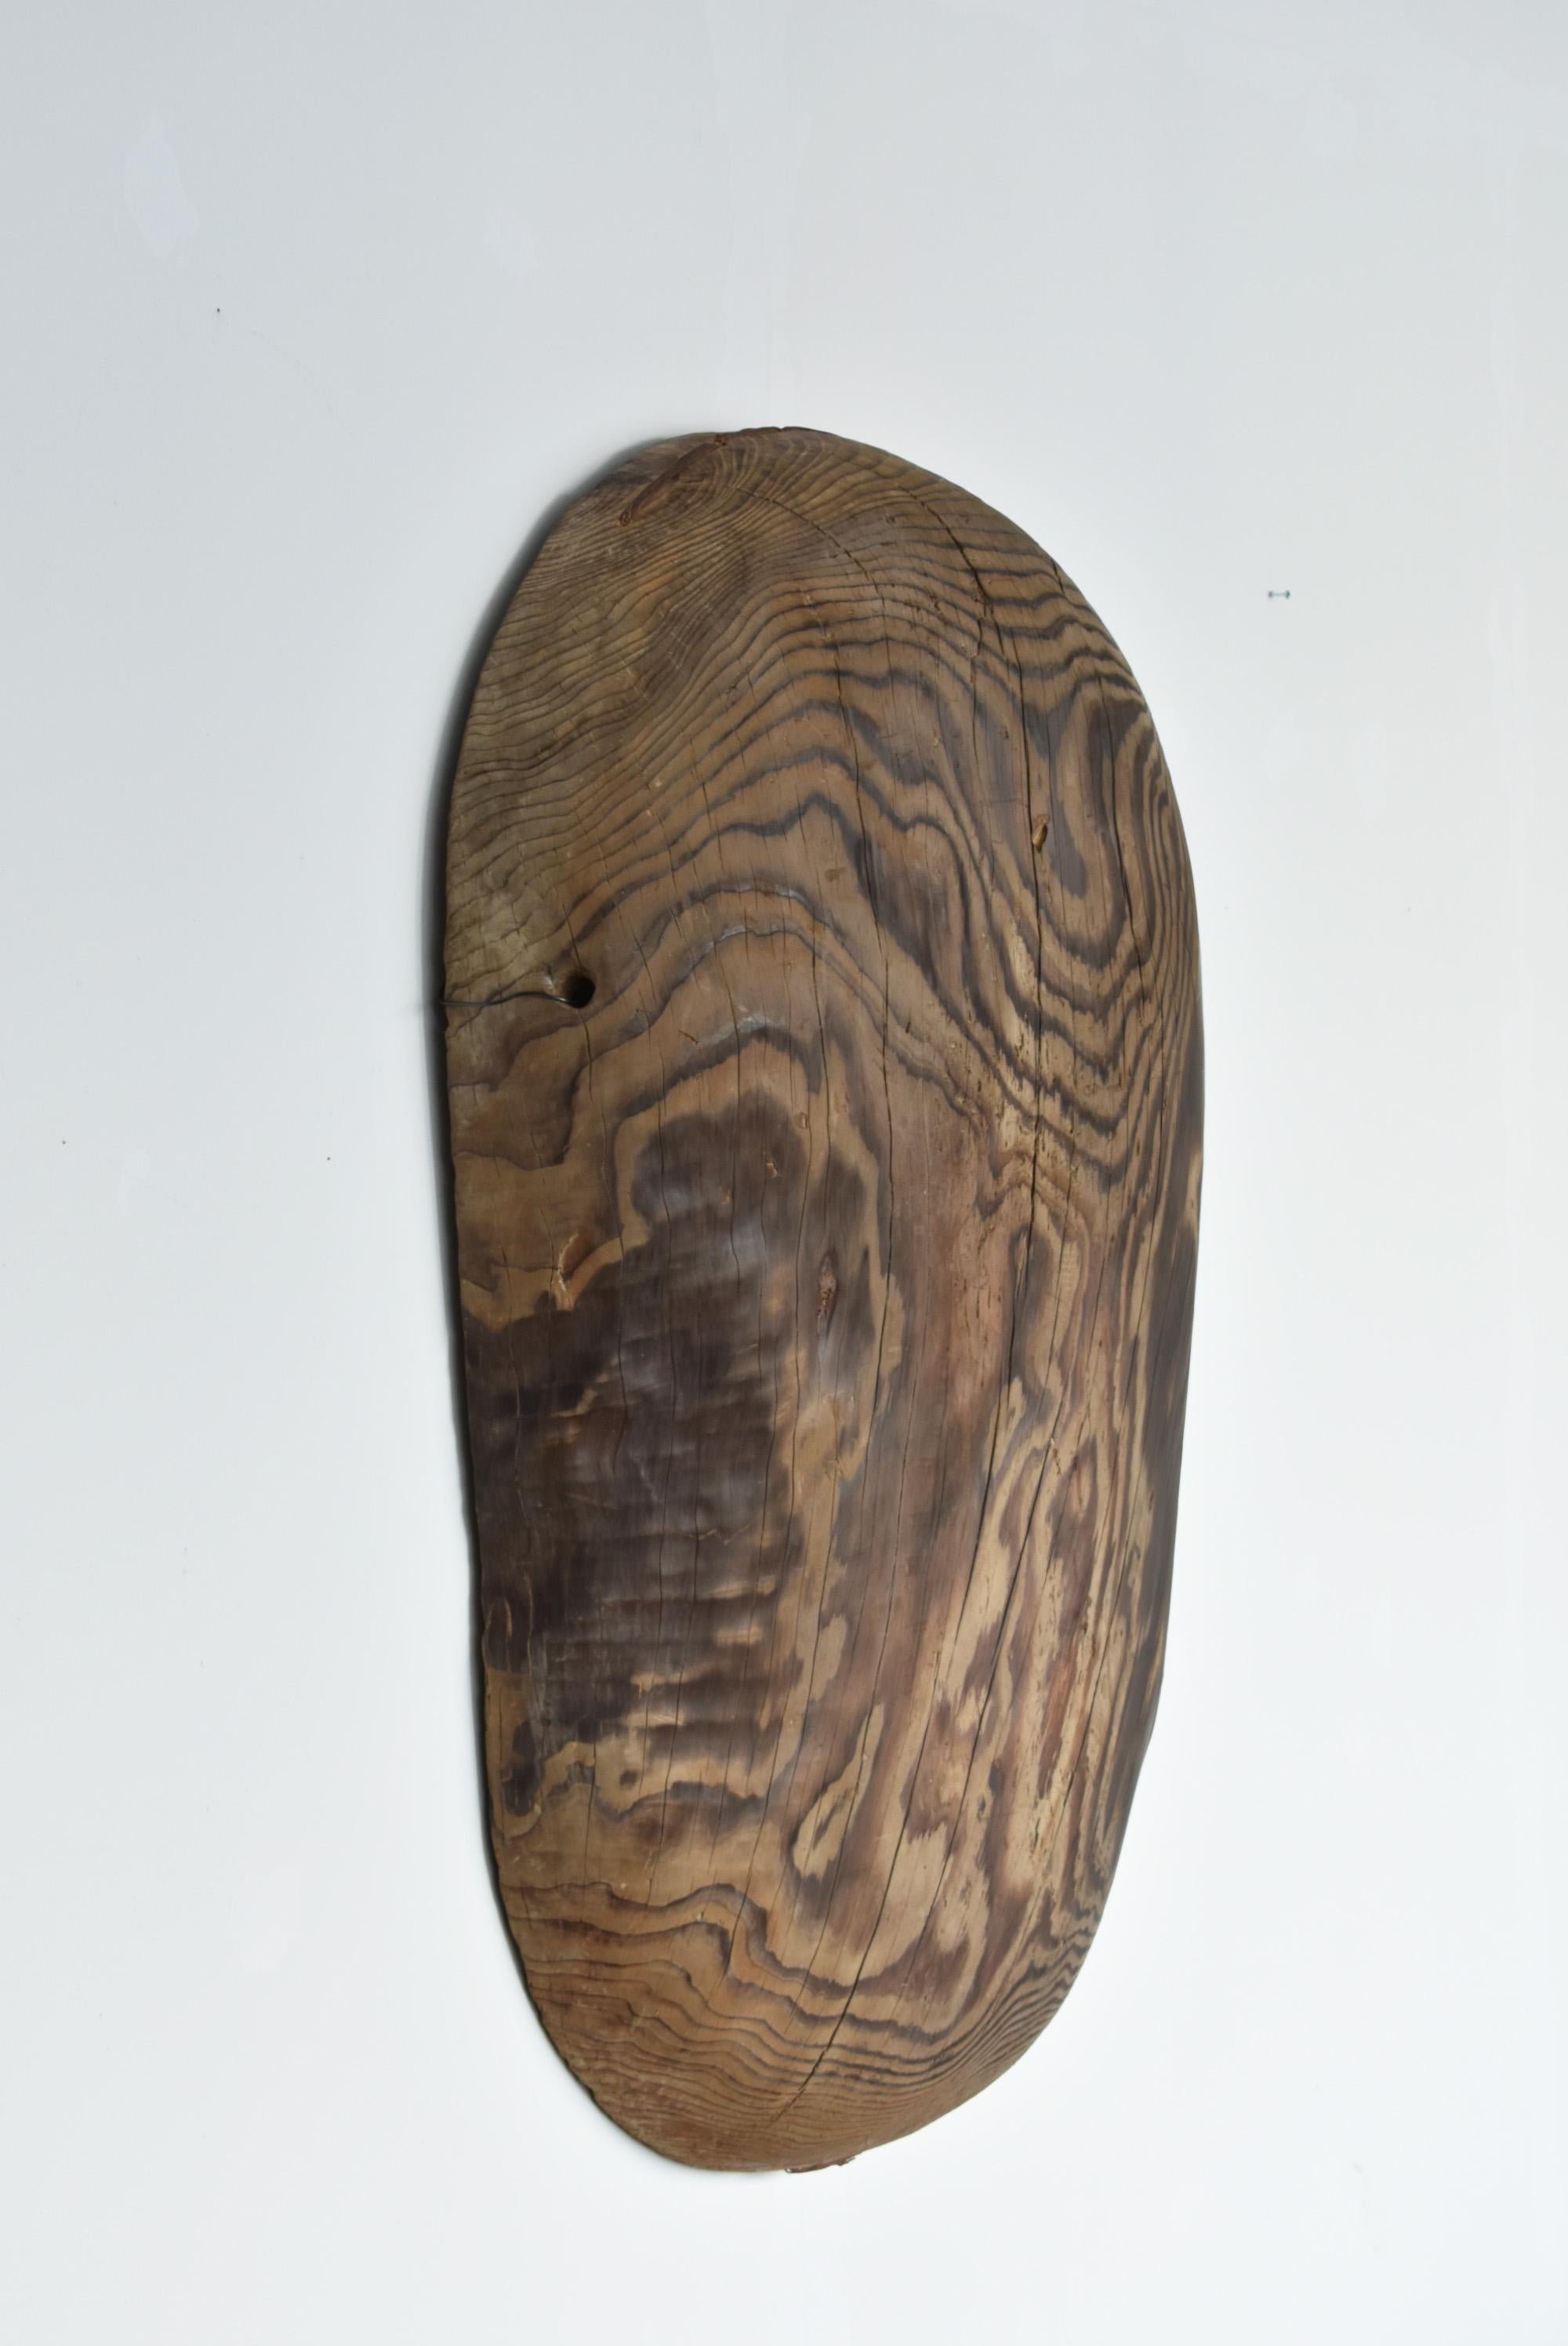 I was lucky enough to receive a very rare item.
A large oval boat made by hollowing out a thick cedar board.
This is a tool that was originally used in rice fields, and when planting rice seedlings, it is placed on top of this boat and pulled by a